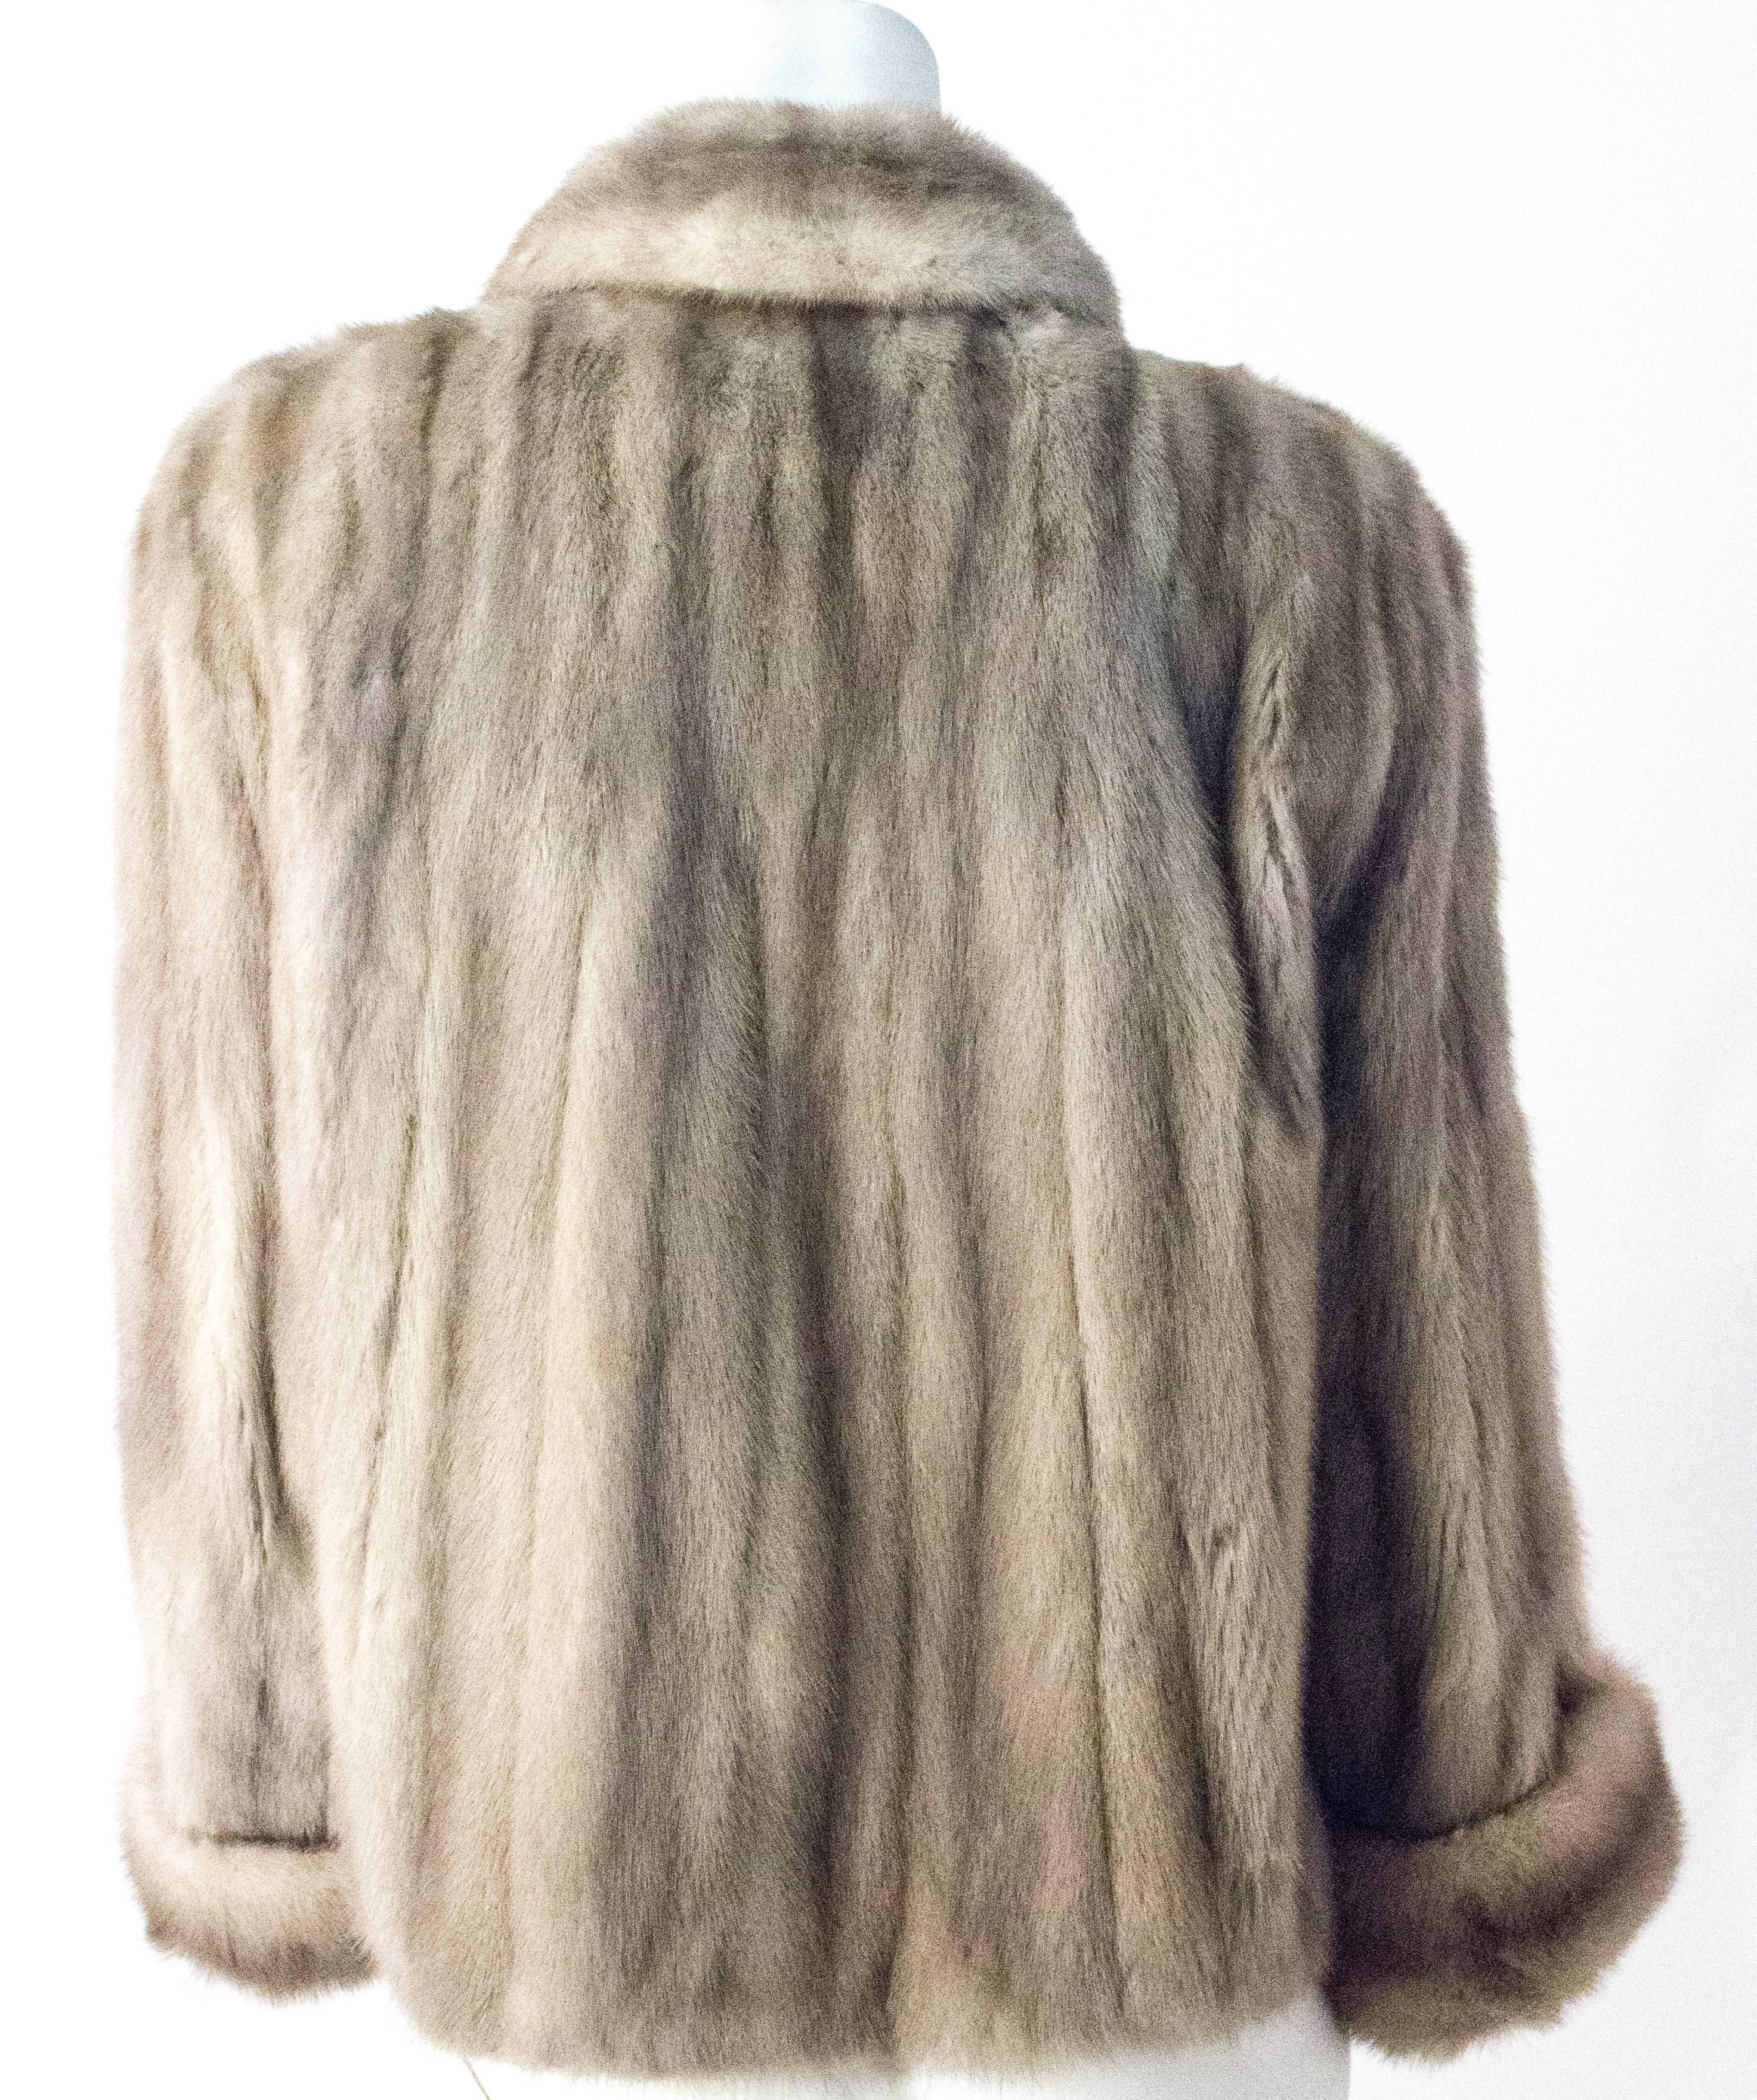 60s Grey Mink Jacket with Cuffed Sleeves. Sleeve is full length with about 8 inches of fold in the cuff for custom length adjustment. Fully lined. Approximately size Small/Medium. 